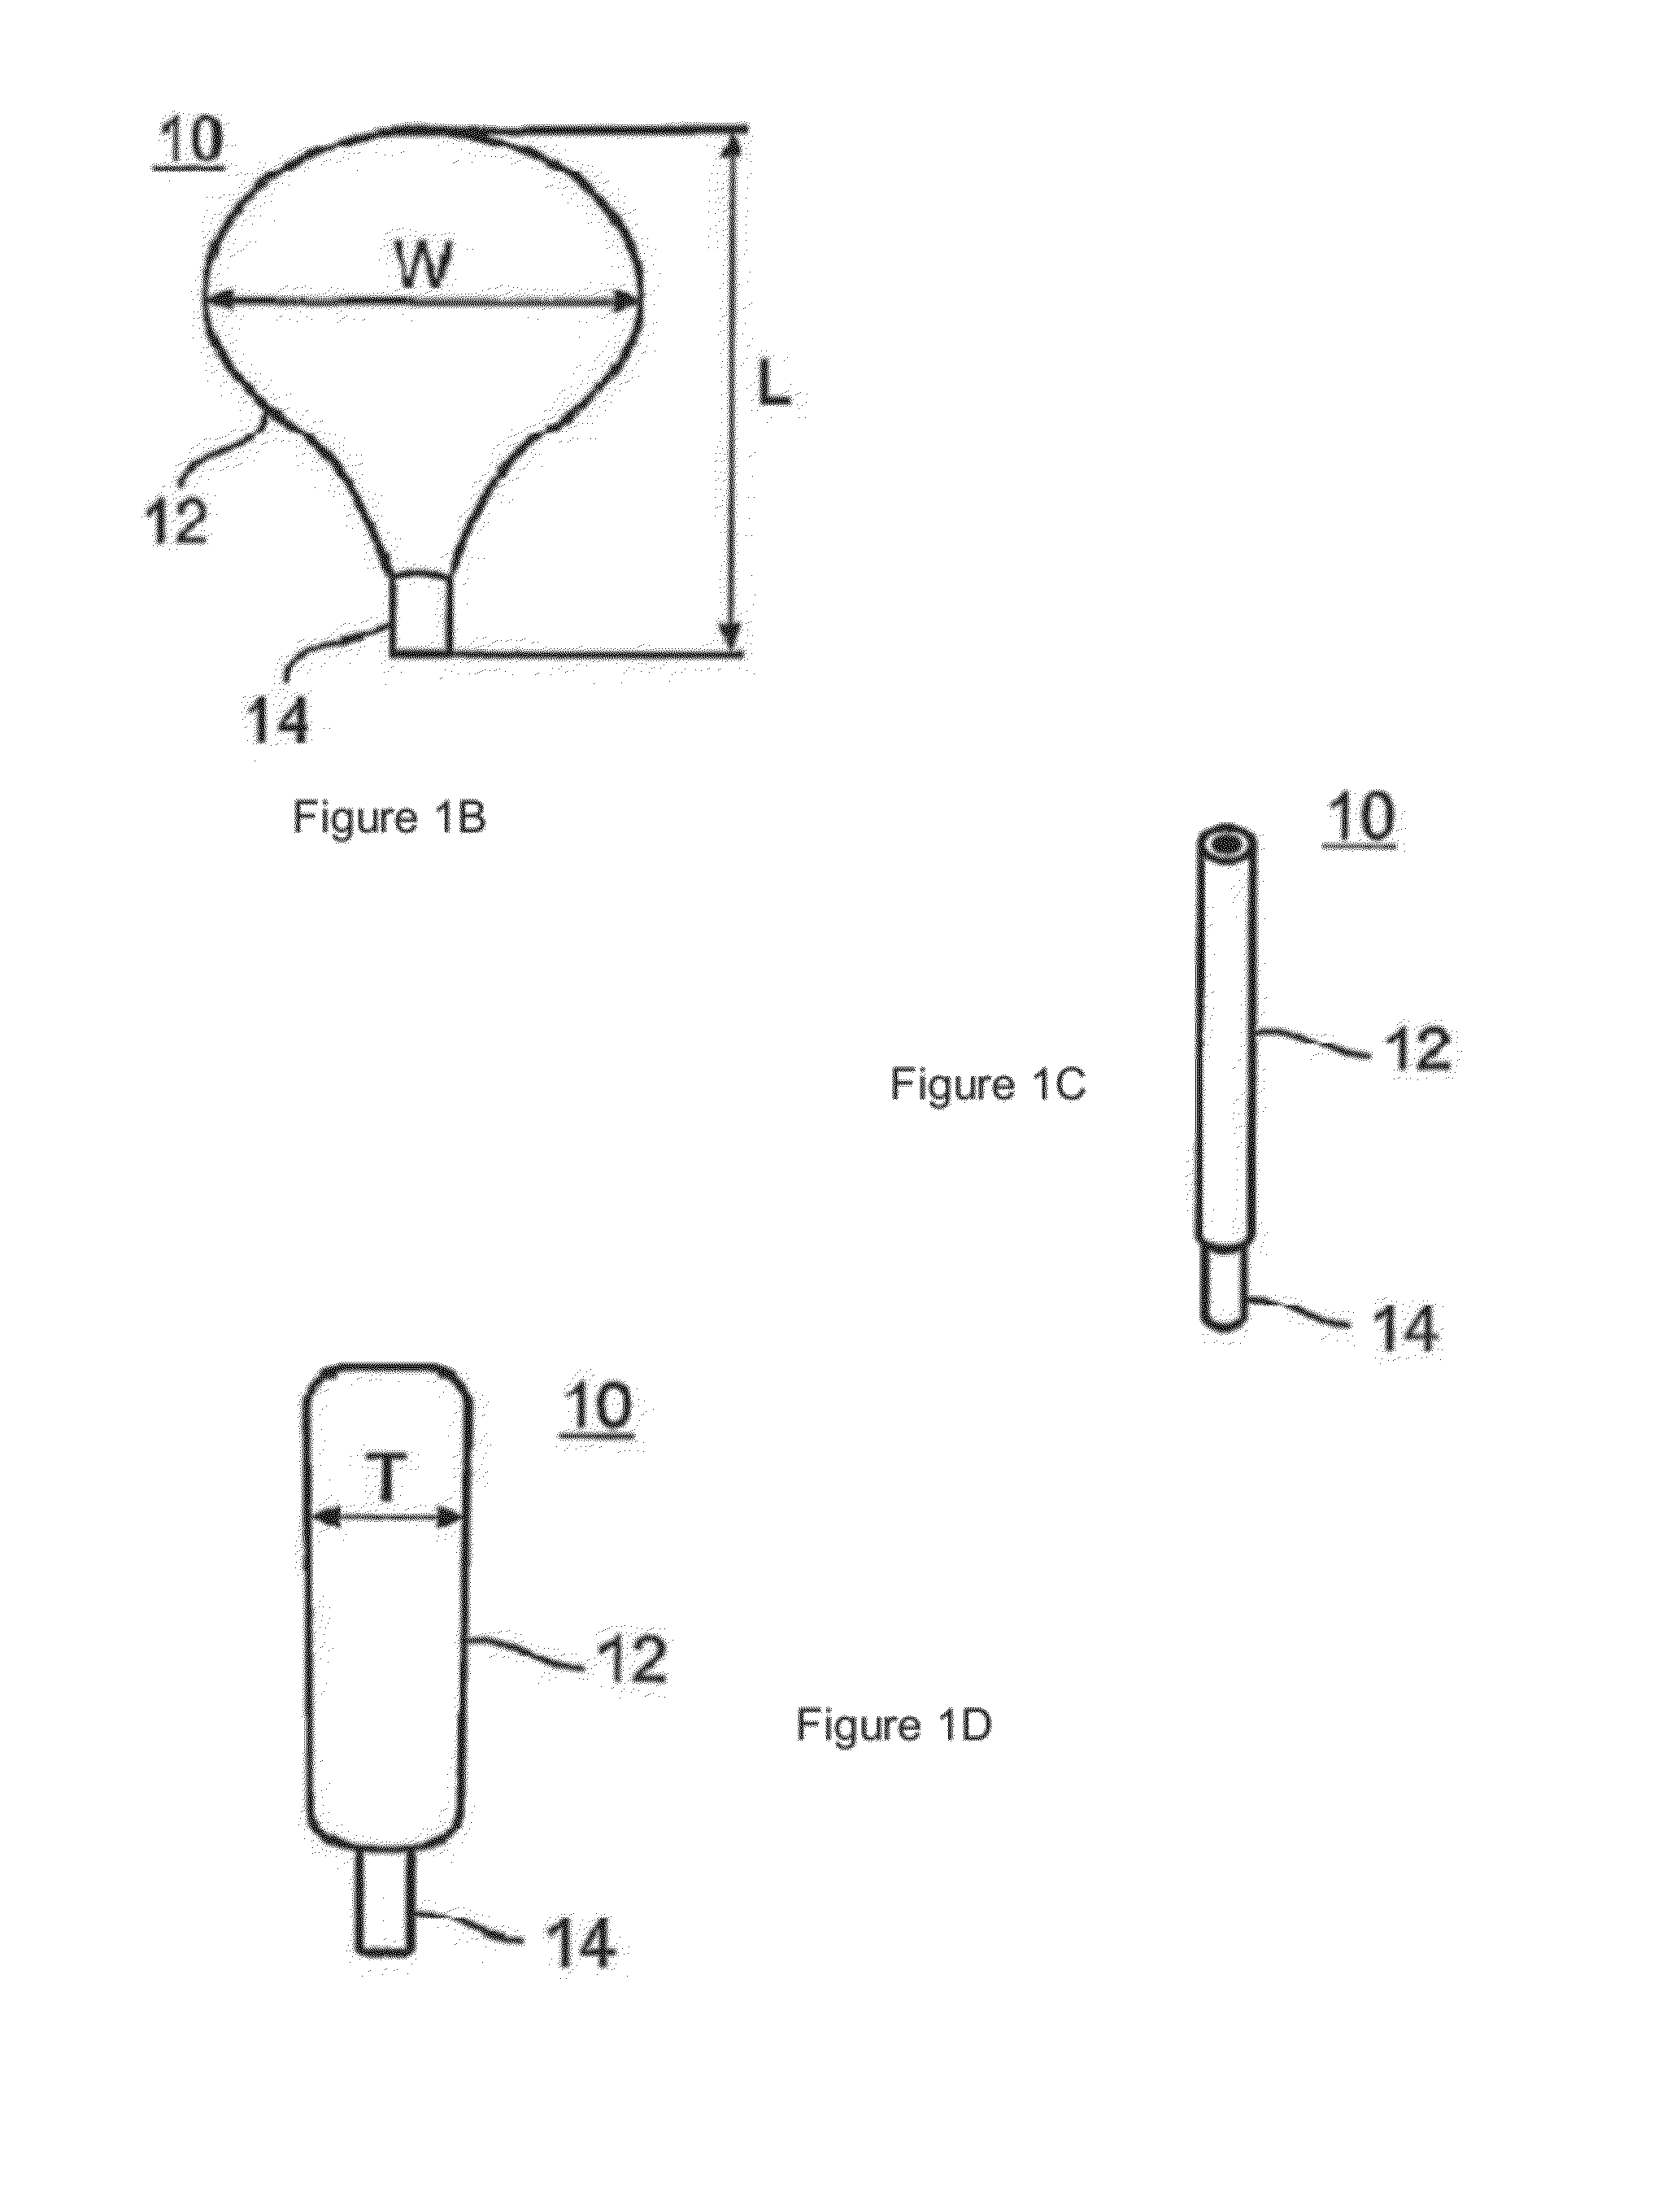 Controlled tissue dissection systems and methods